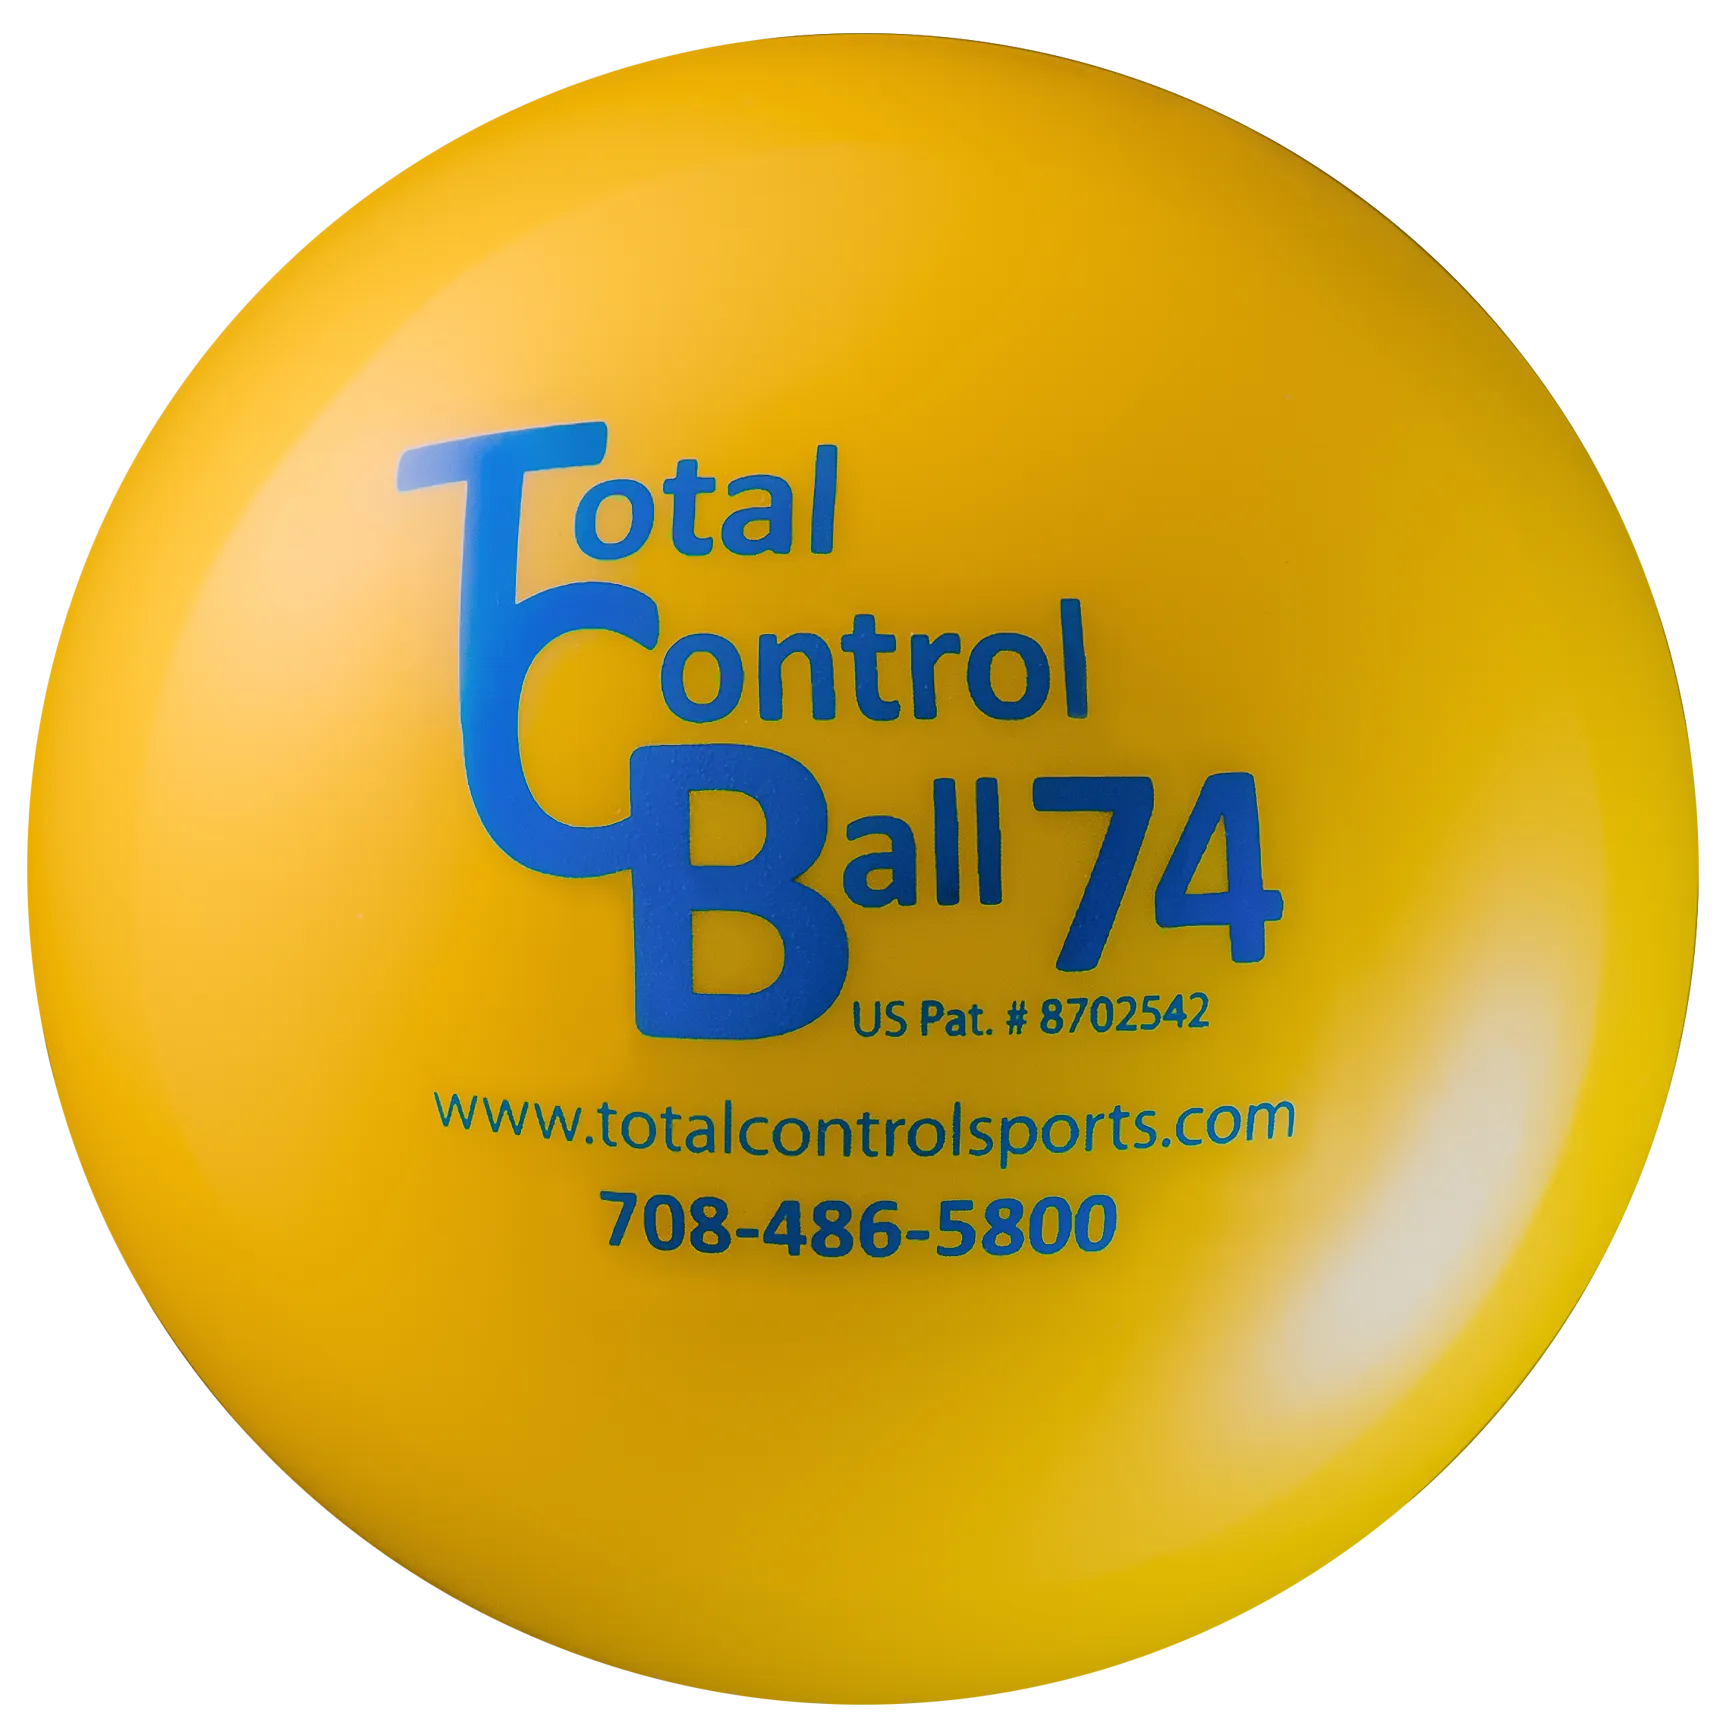 Total Control Sports